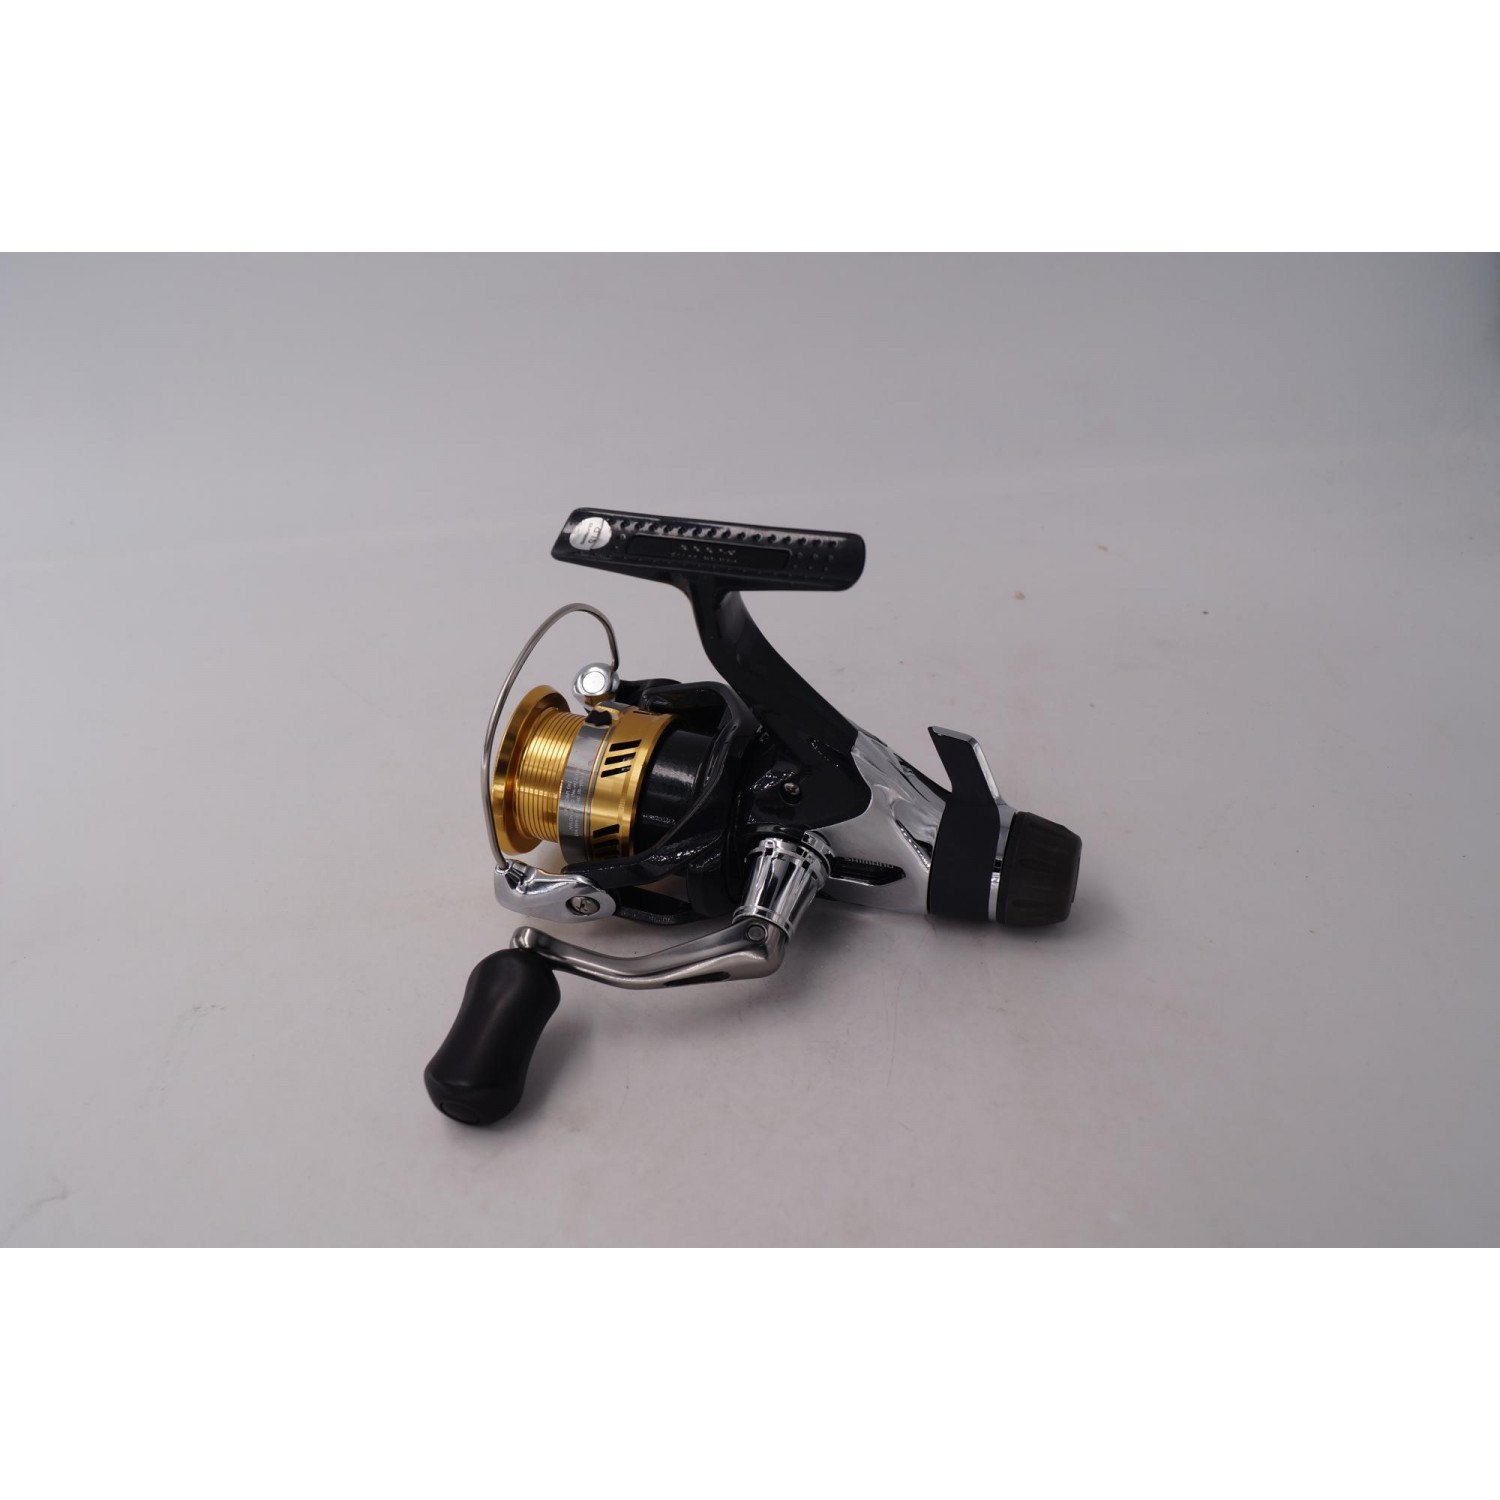 Shimano Sahara 1000 R, Spinning reel with rear drag, including spare spool,  noise while cranking